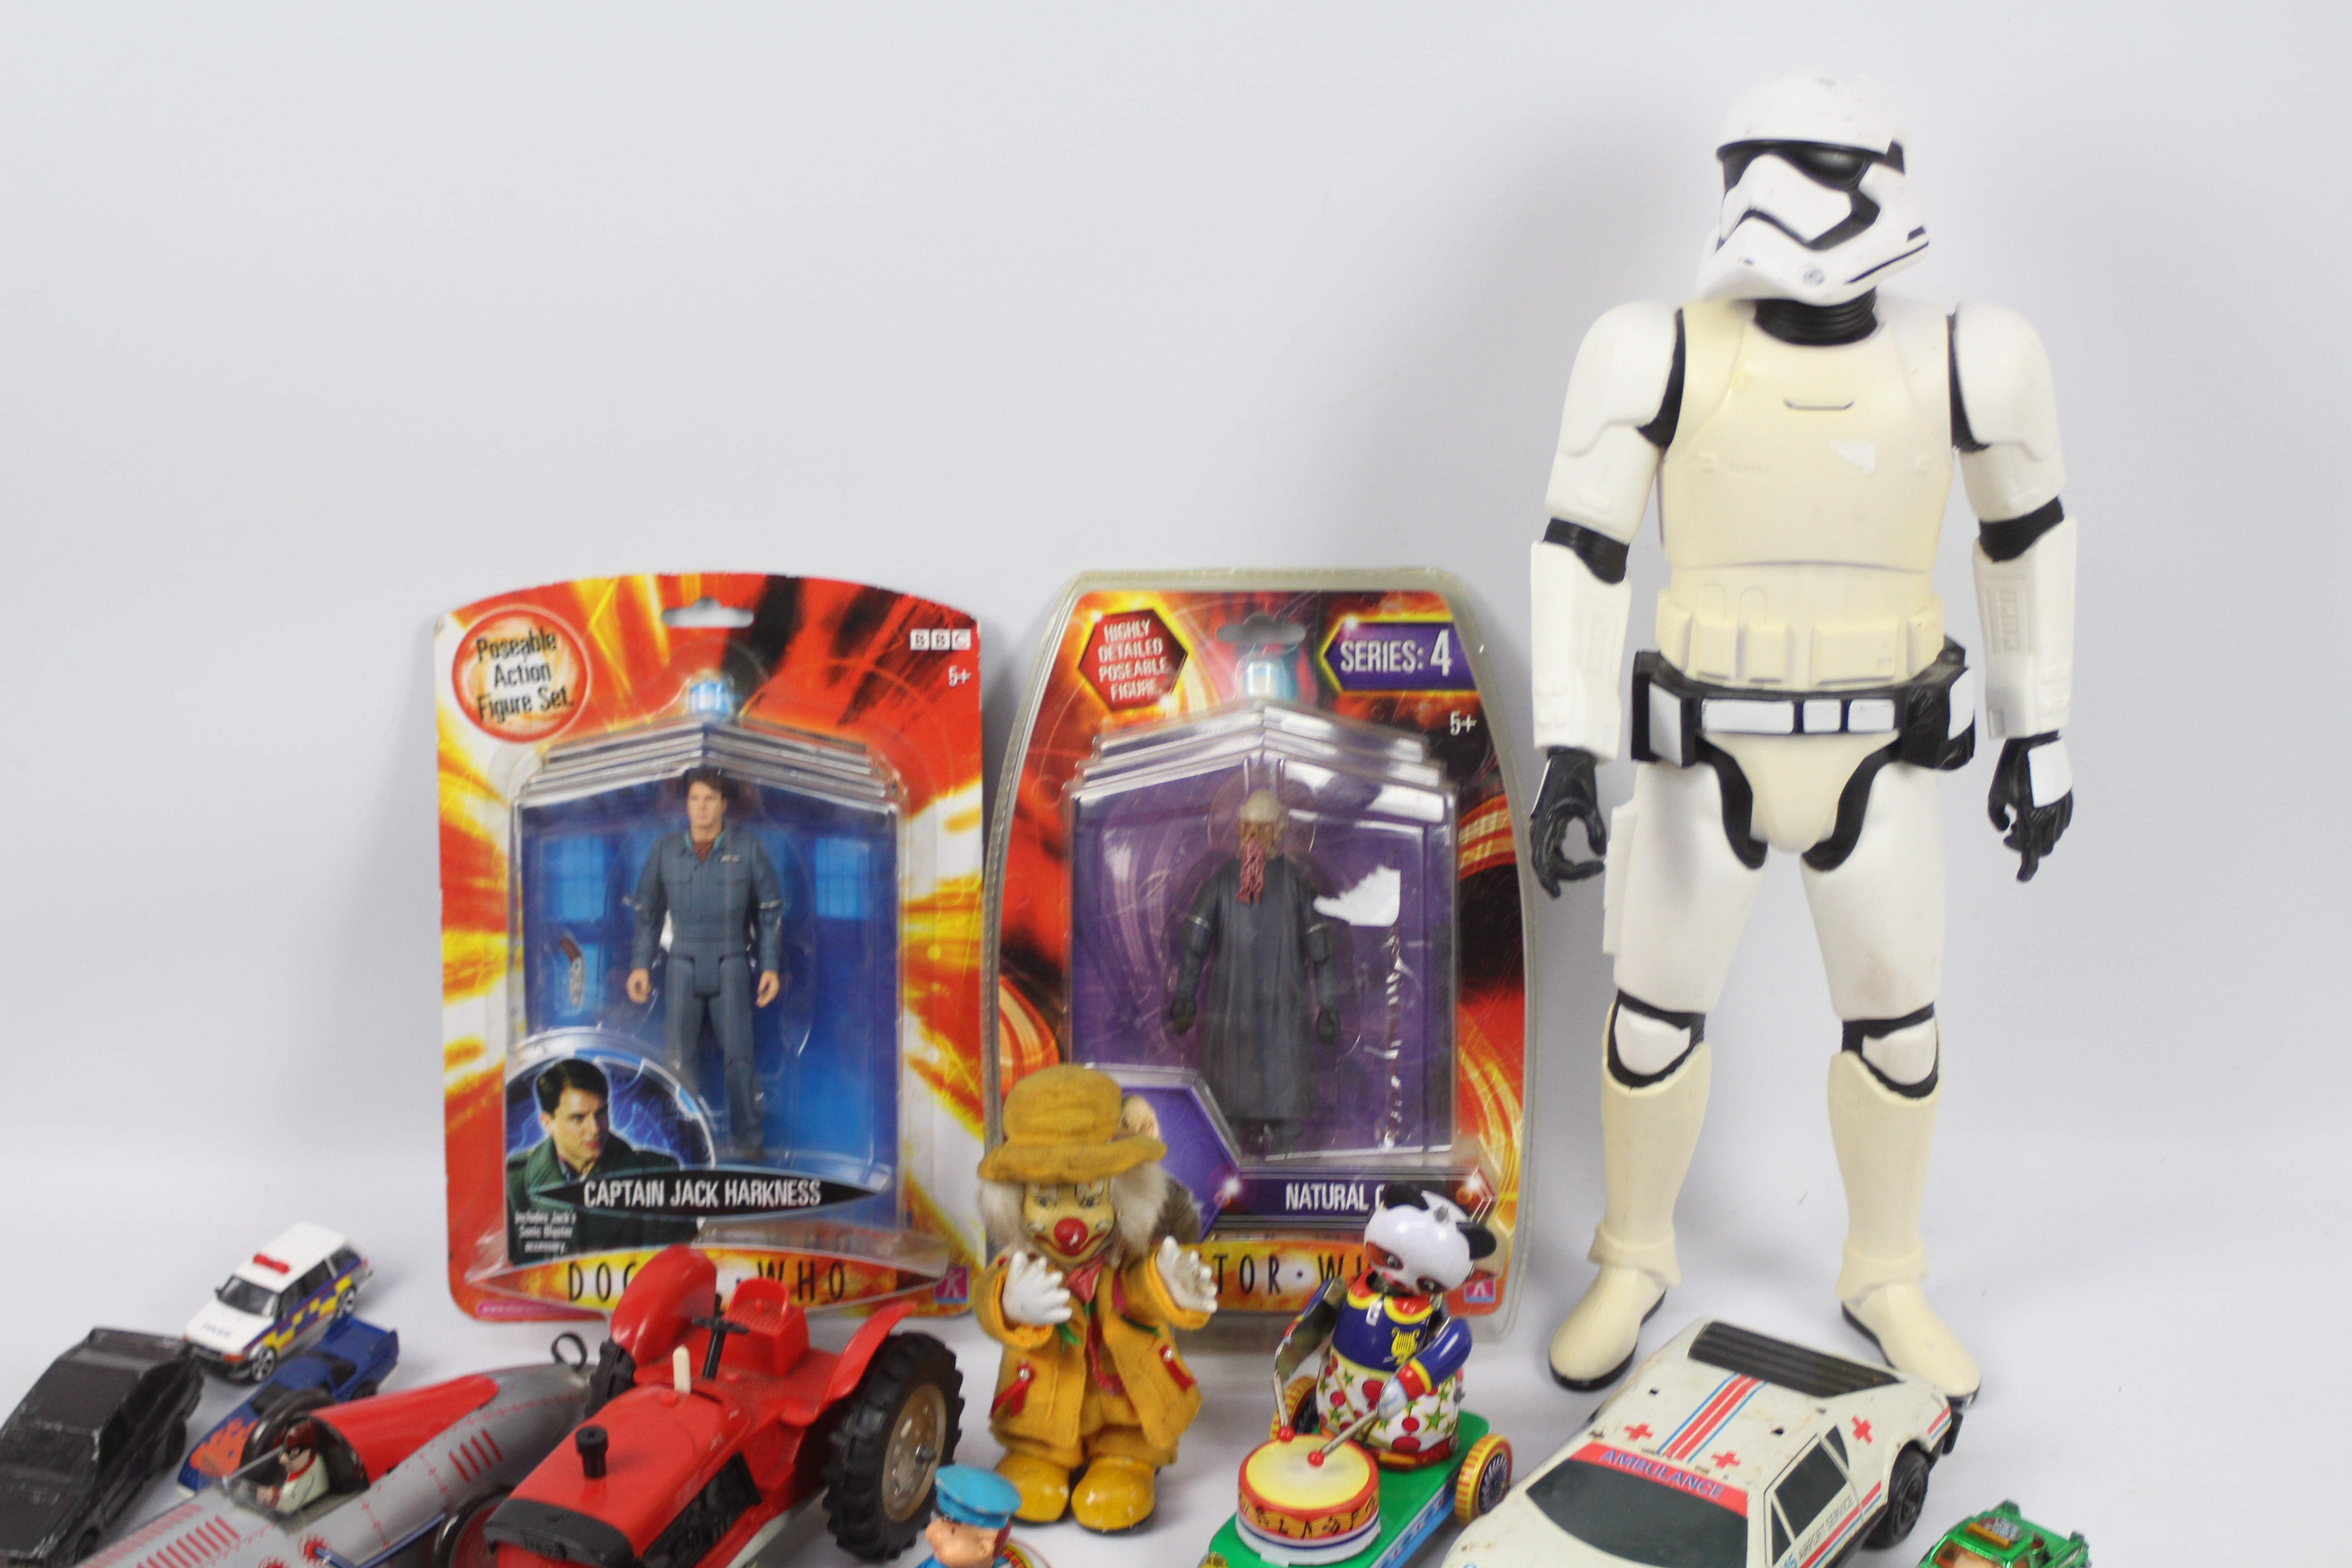 Star Wars - Transformers - Dr. Who - Tin Toys. 33 items approx. - Image 2 of 3